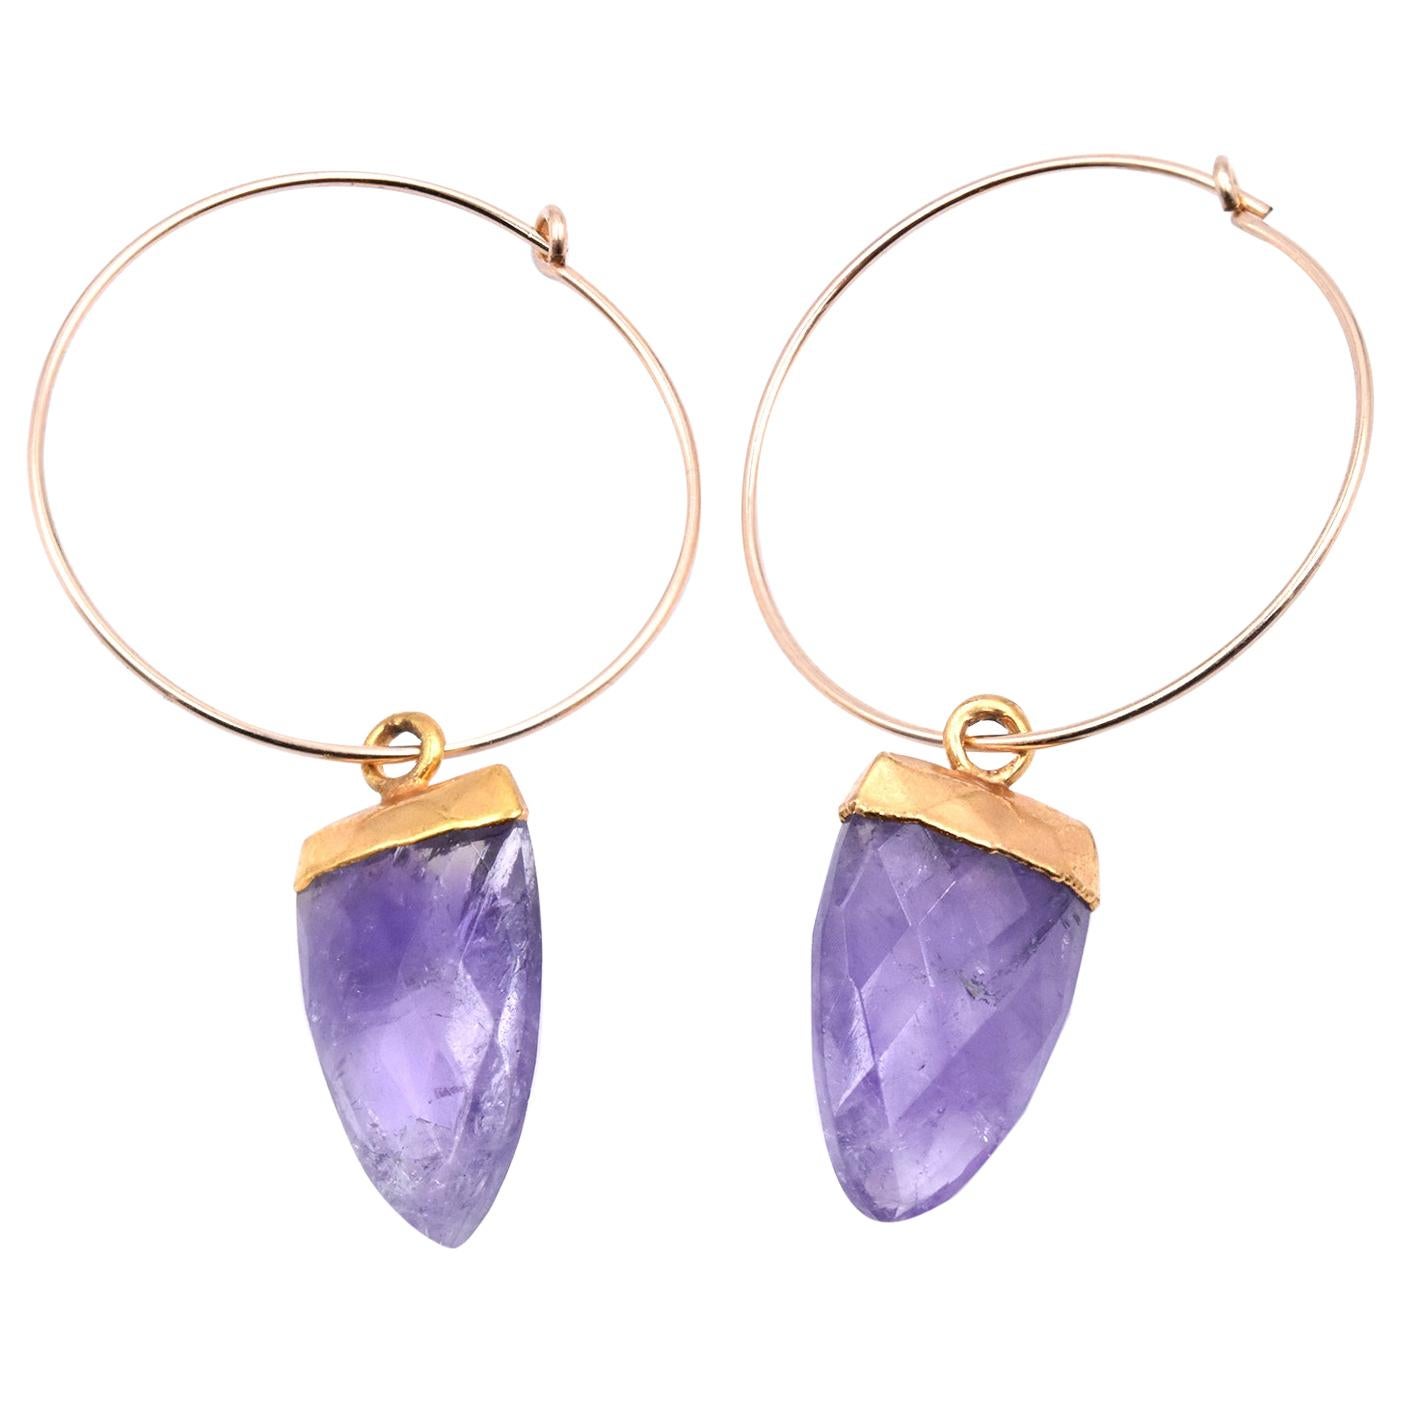 14 Karat Yellow Gold Hoops with Gold-Plated Amethyst Drops